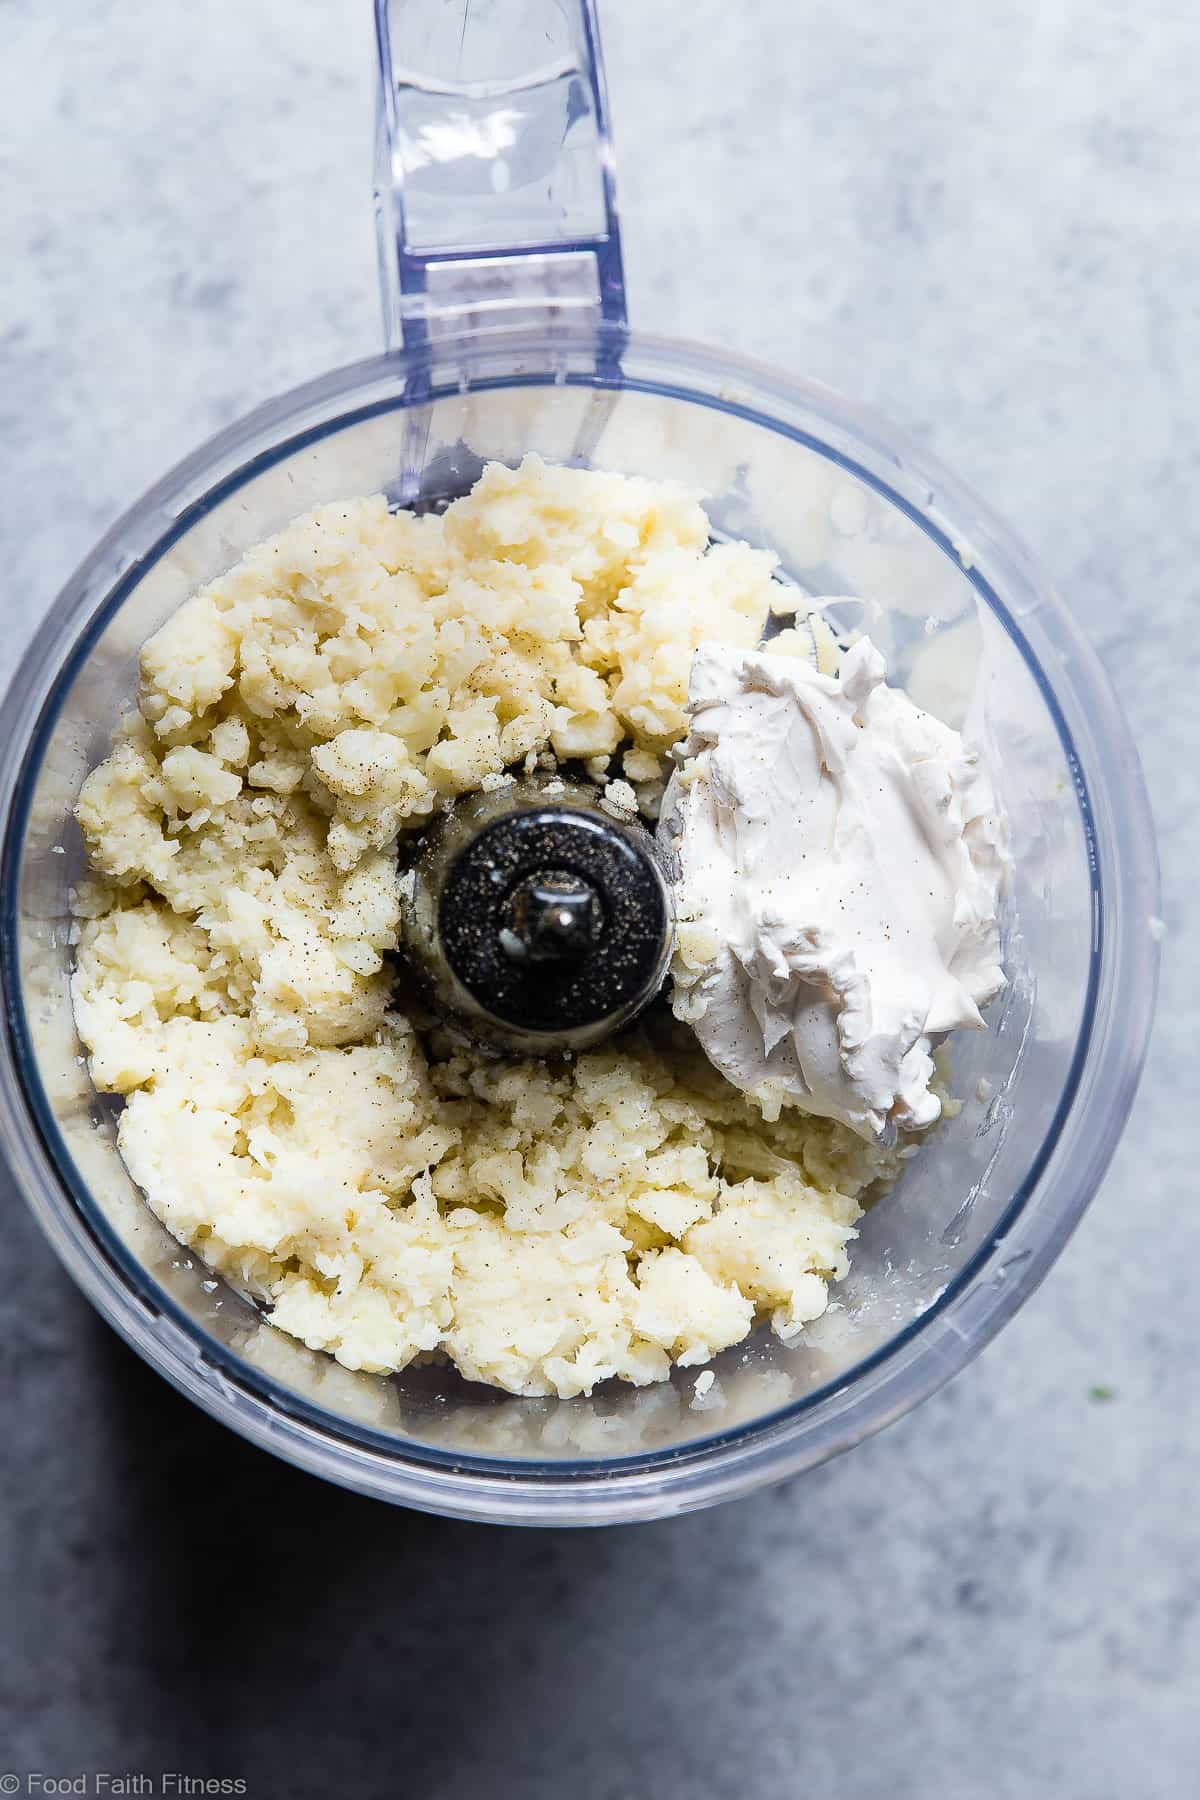 How To Make Cauliflower Mashed Potatoes - An easy, step-by-step guide with photos that shows you how to make a cauliflower mashed potatoes recipe, that tastes like mashed potatoes, but are keto, low carb, gluten free and healthy! | Foodfaithfitness.com | @FoodfaithFit